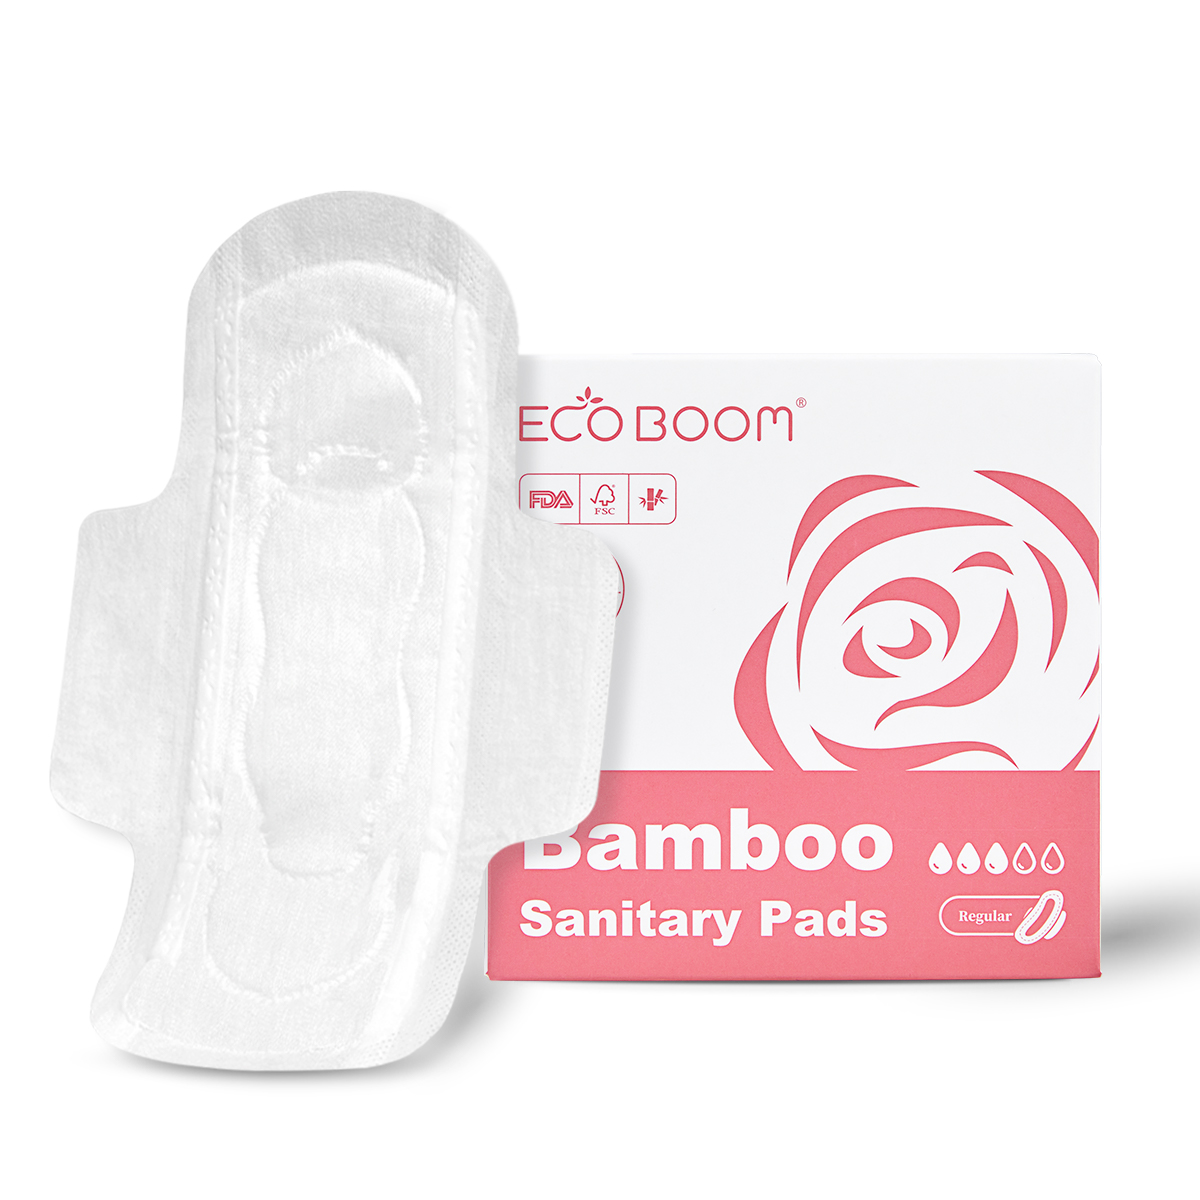 ECO BOOM bamboo menstrual pads manufacturers-2